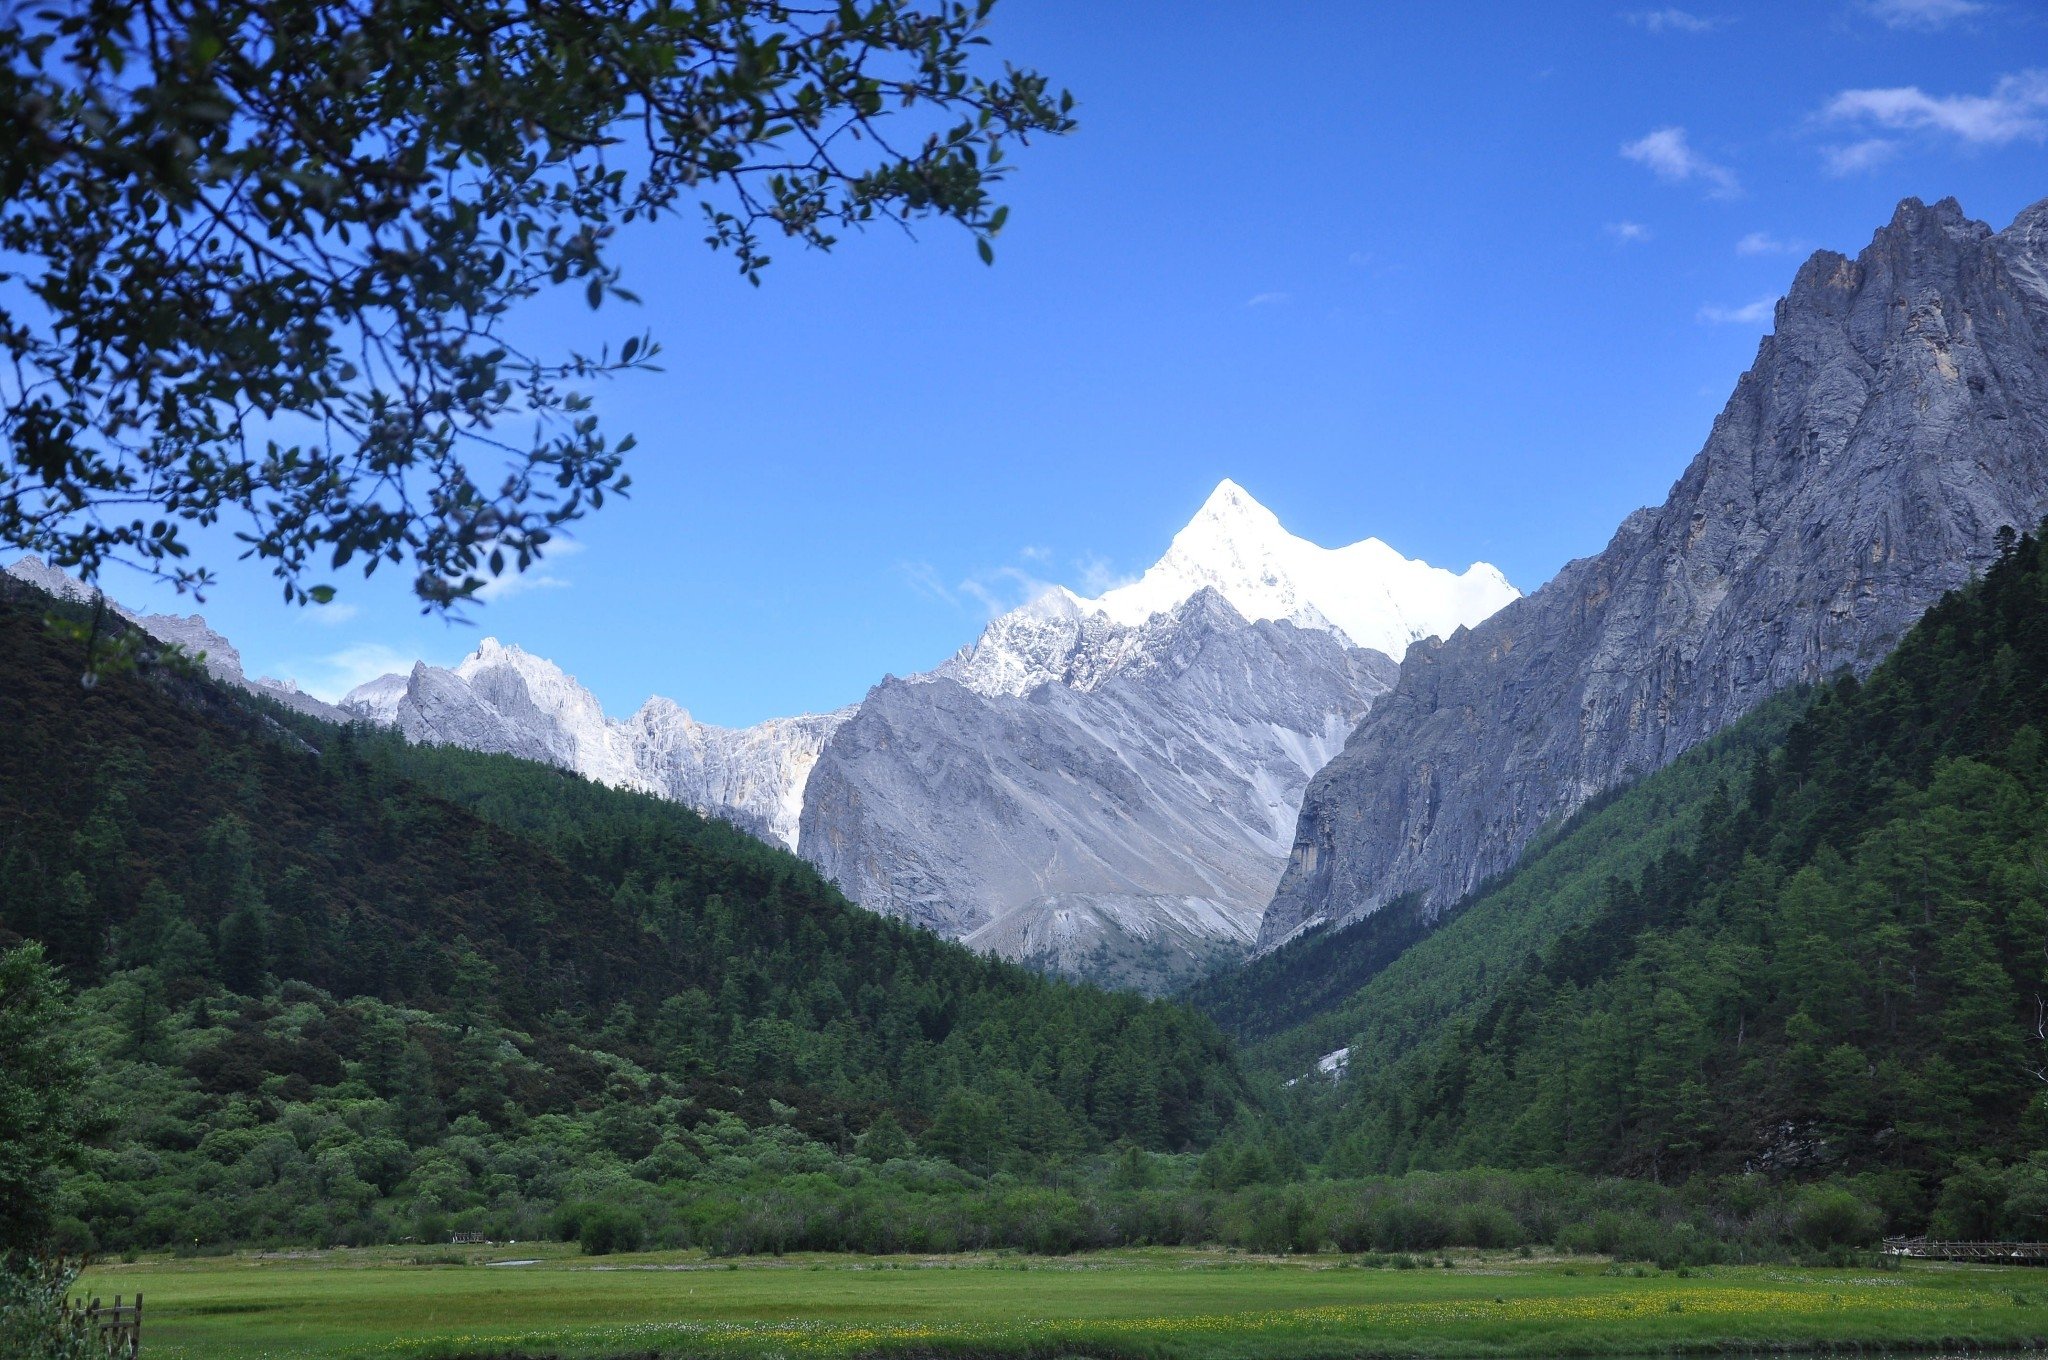 Yading nature reserve holy peaks in summer